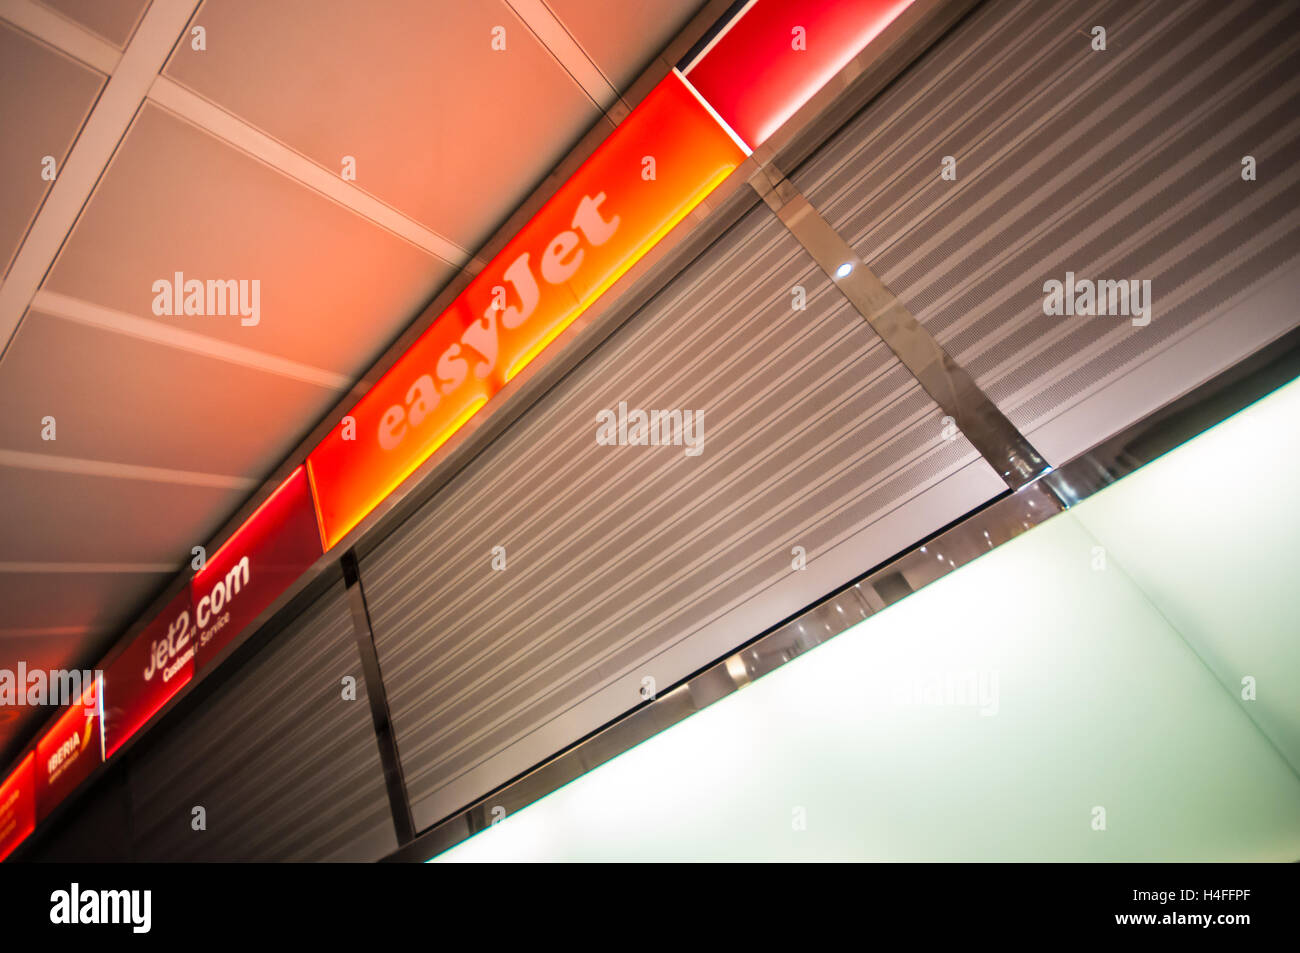 Closed easyJet, Jet2 and Norwegian airline help desks at Alicante airport, Spain. Shut shutters Stock Photo